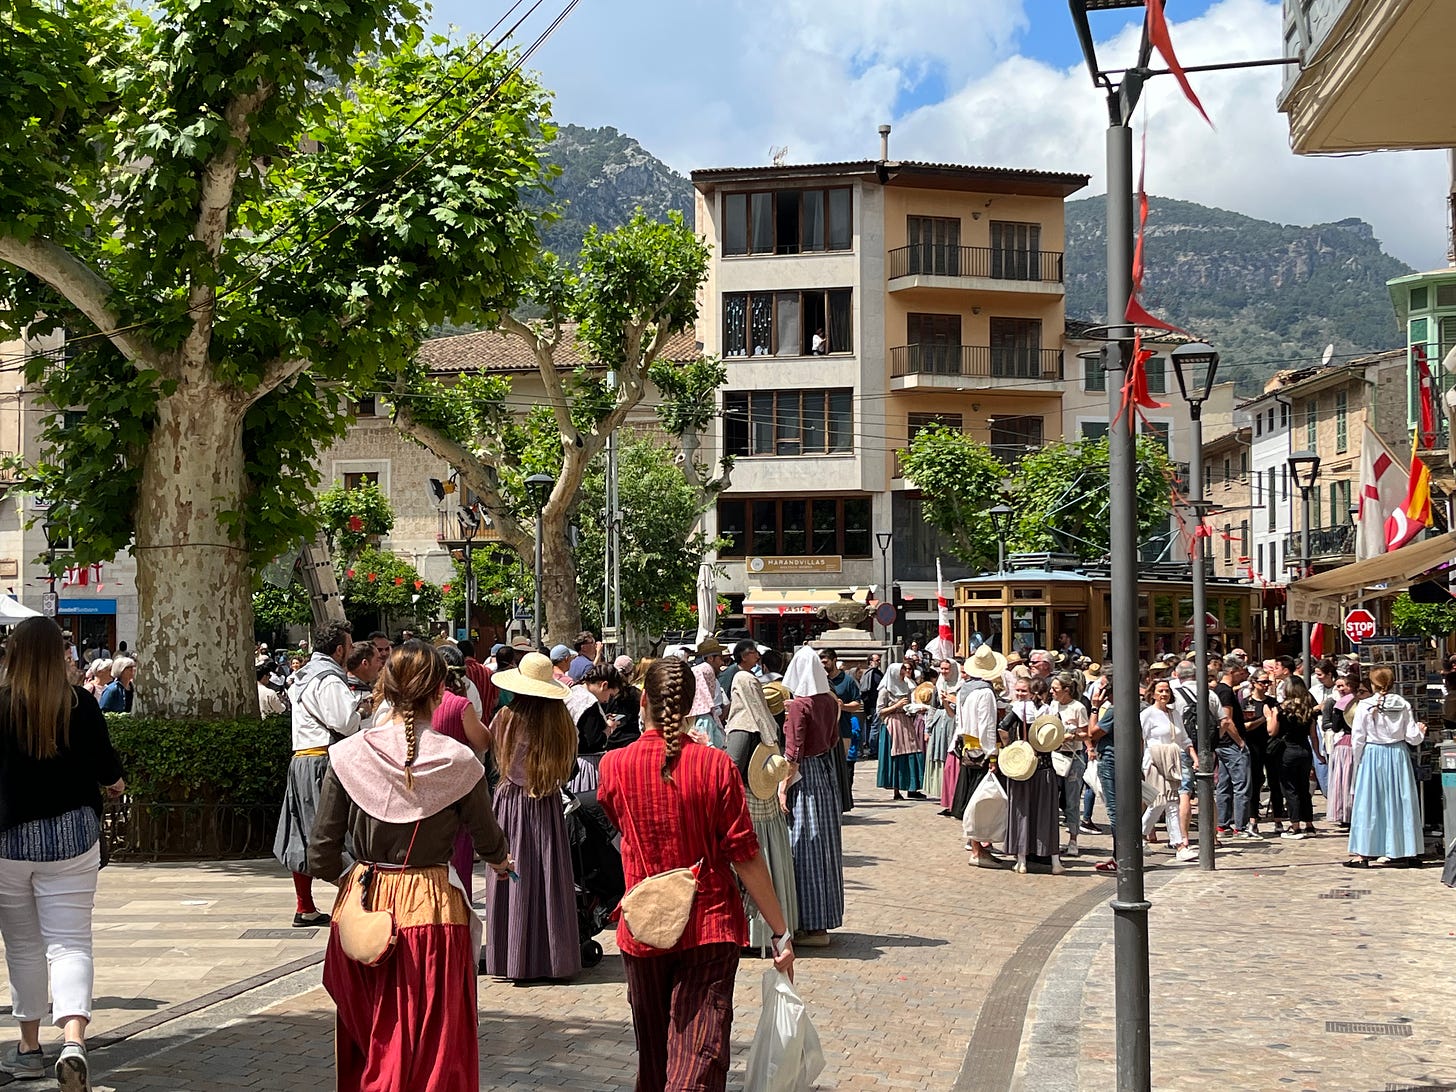 A corner of the main square in Soller, filled with people in traditional period costumes